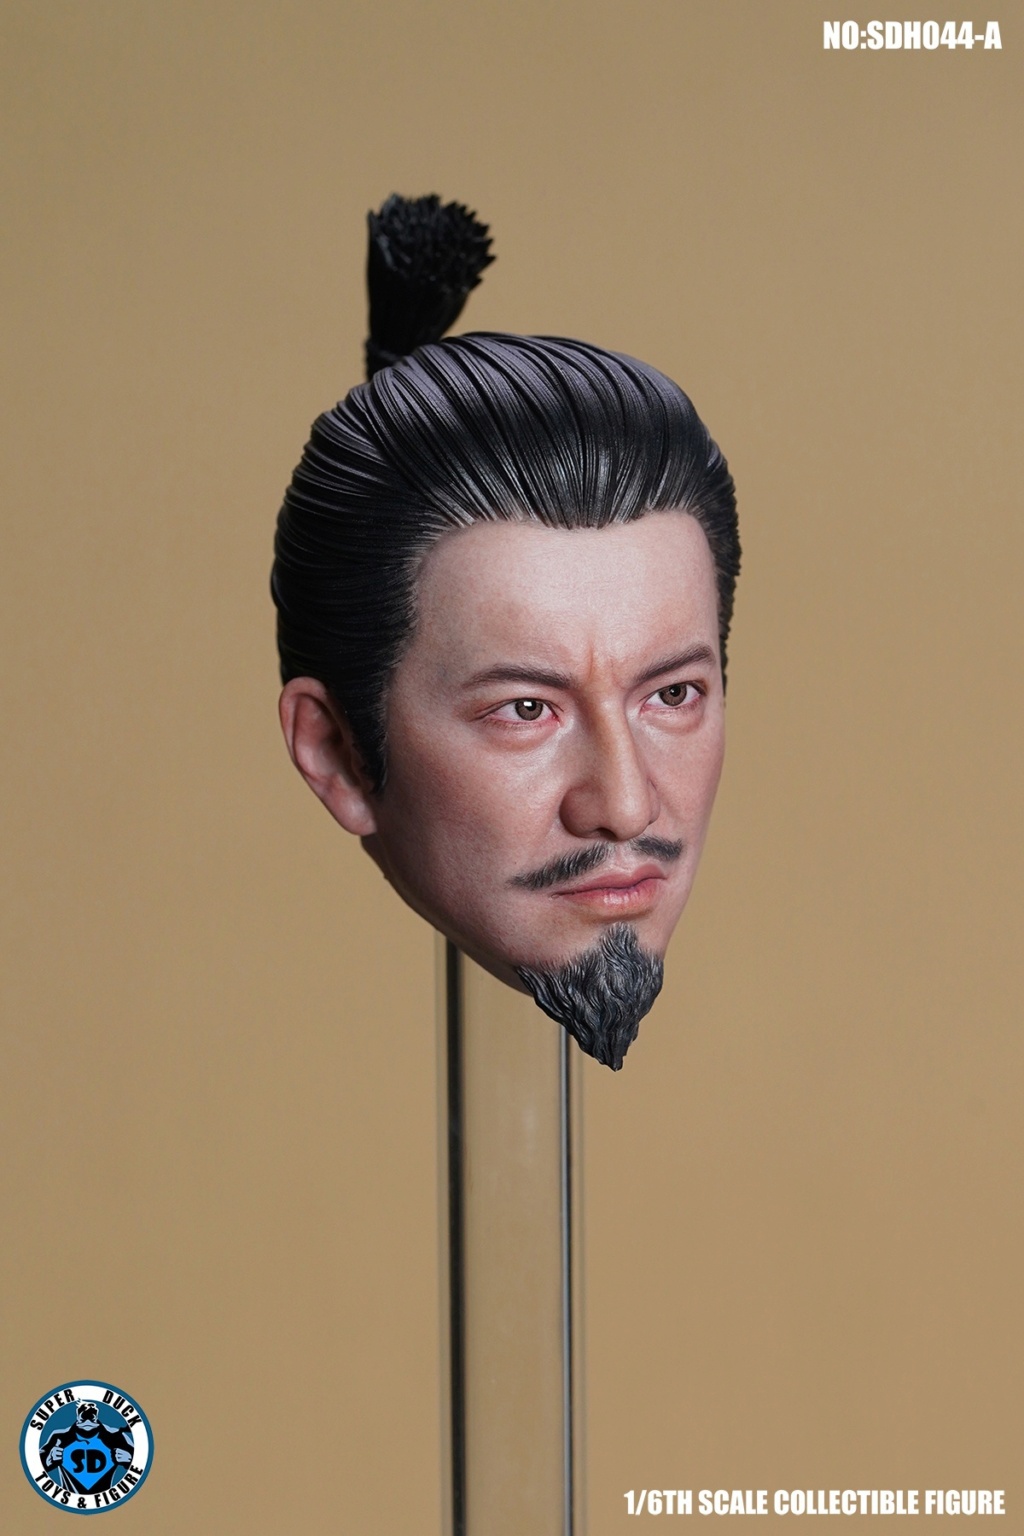 Japanese - NEW PRODUCT: Super Duck: 1/6 Japanese samurai head carving (SDH044-A version without neck, SDH044-B version with neck) 21225012